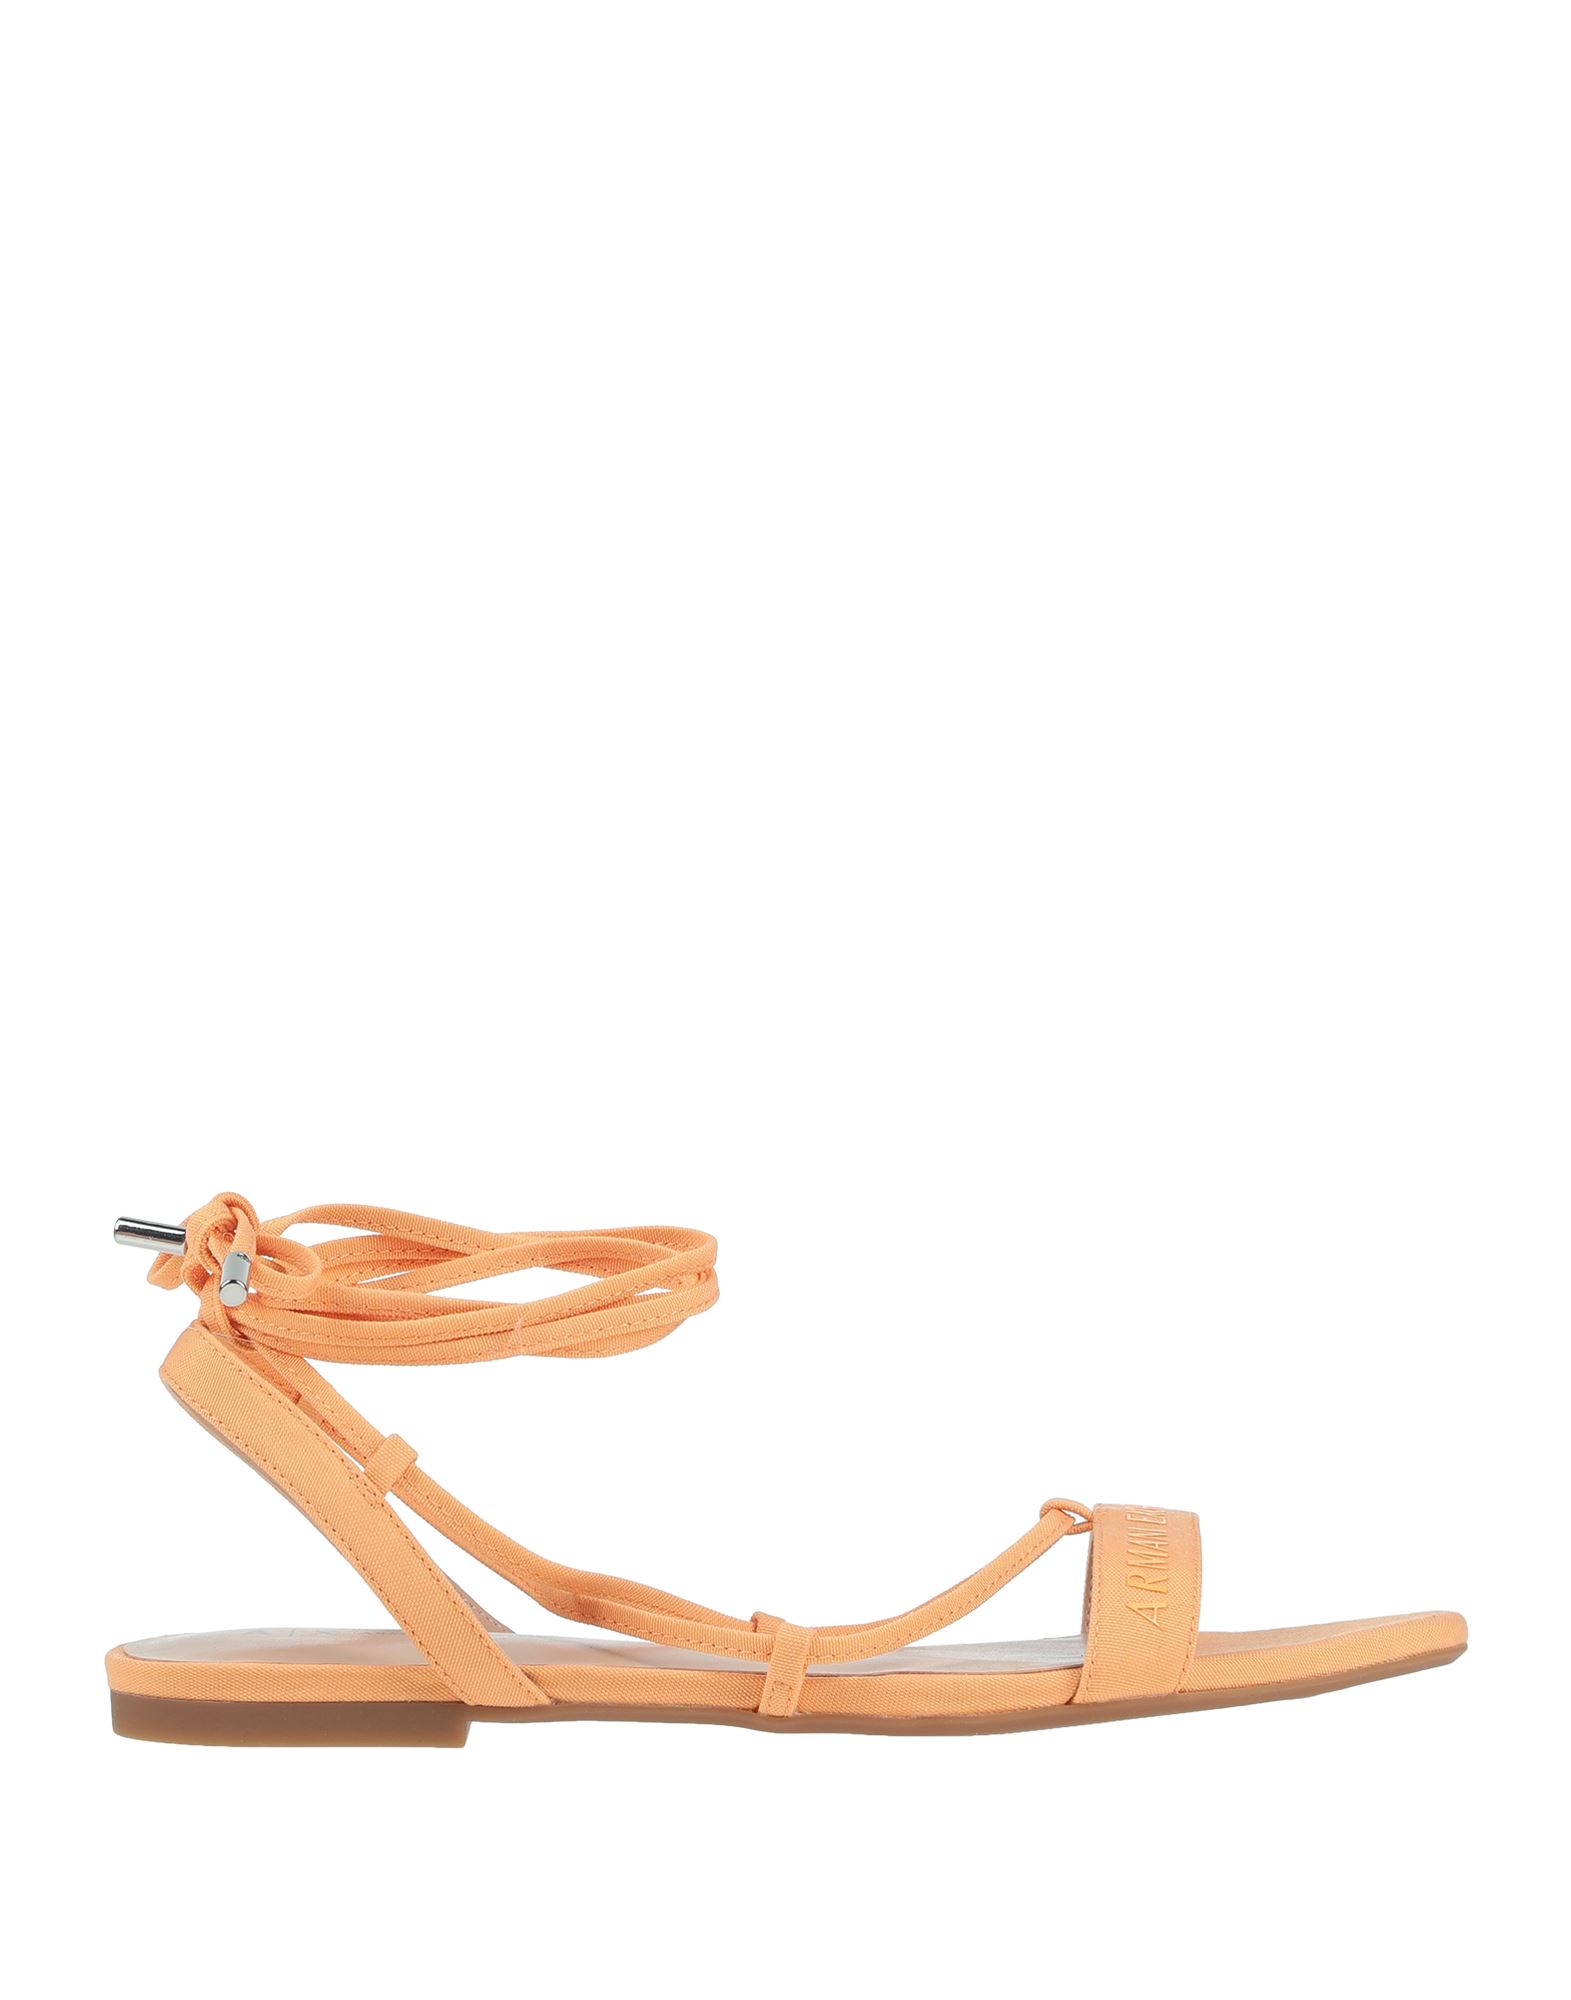 Armani Exchange Sandals In Apricot